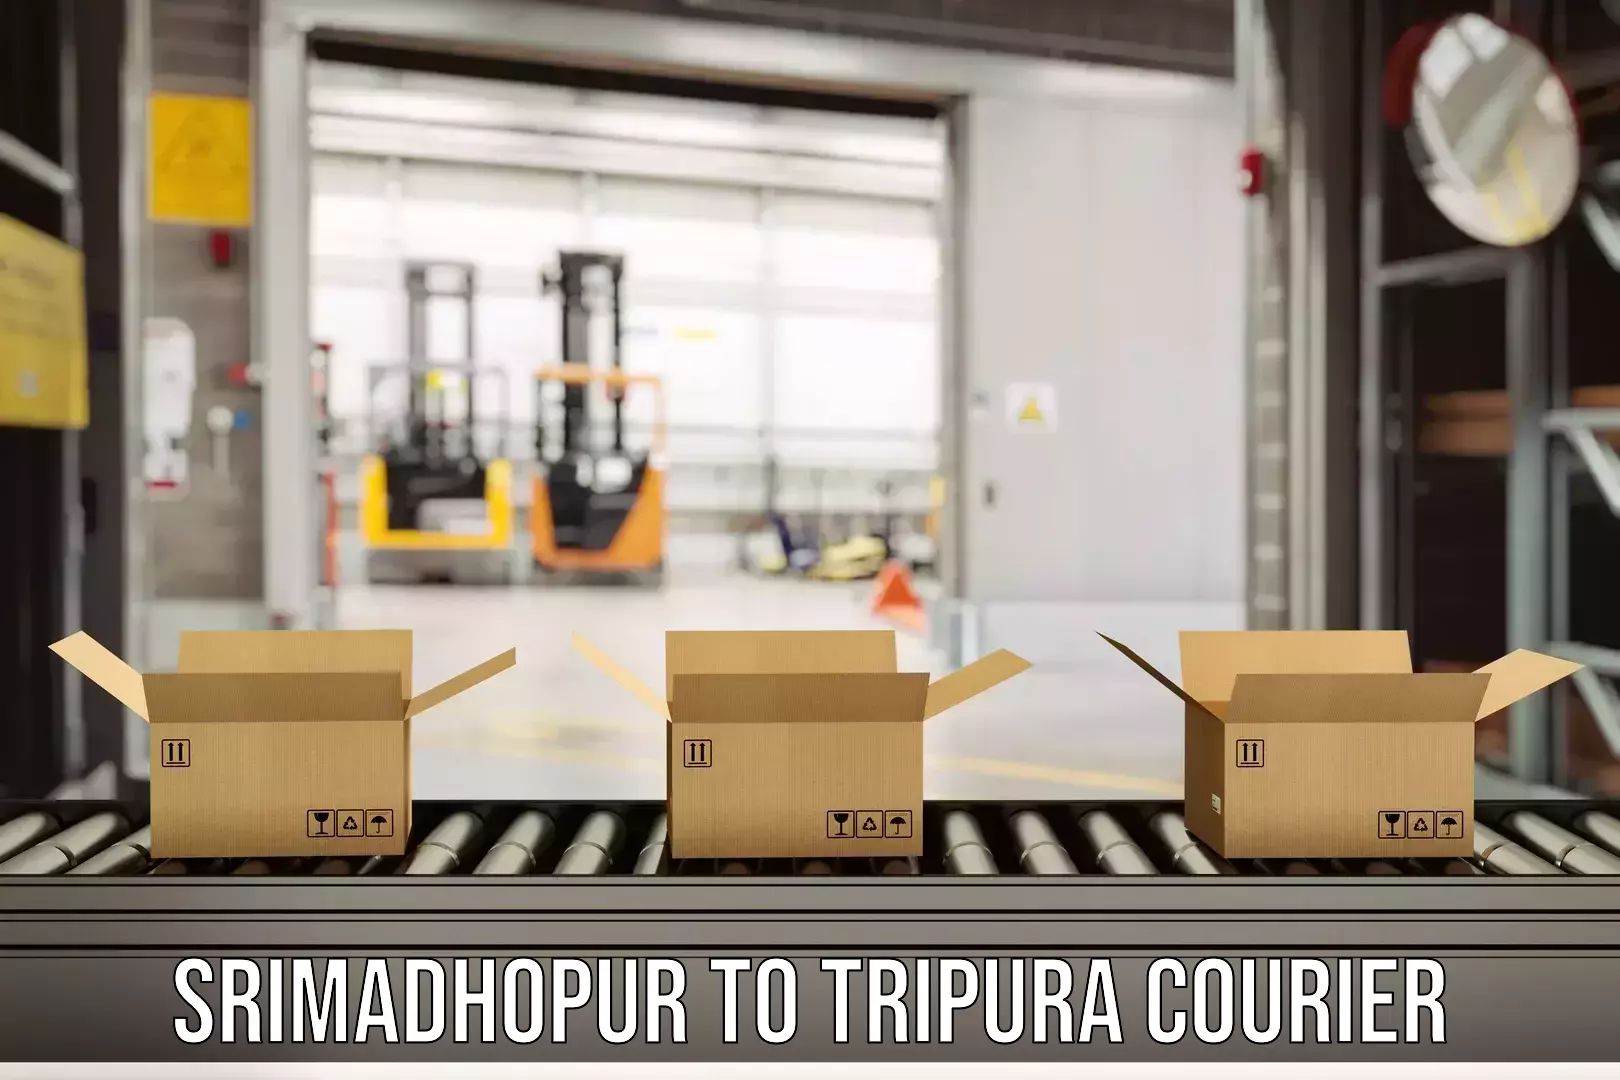 Global courier networks Srimadhopur to Udaipur Tripura